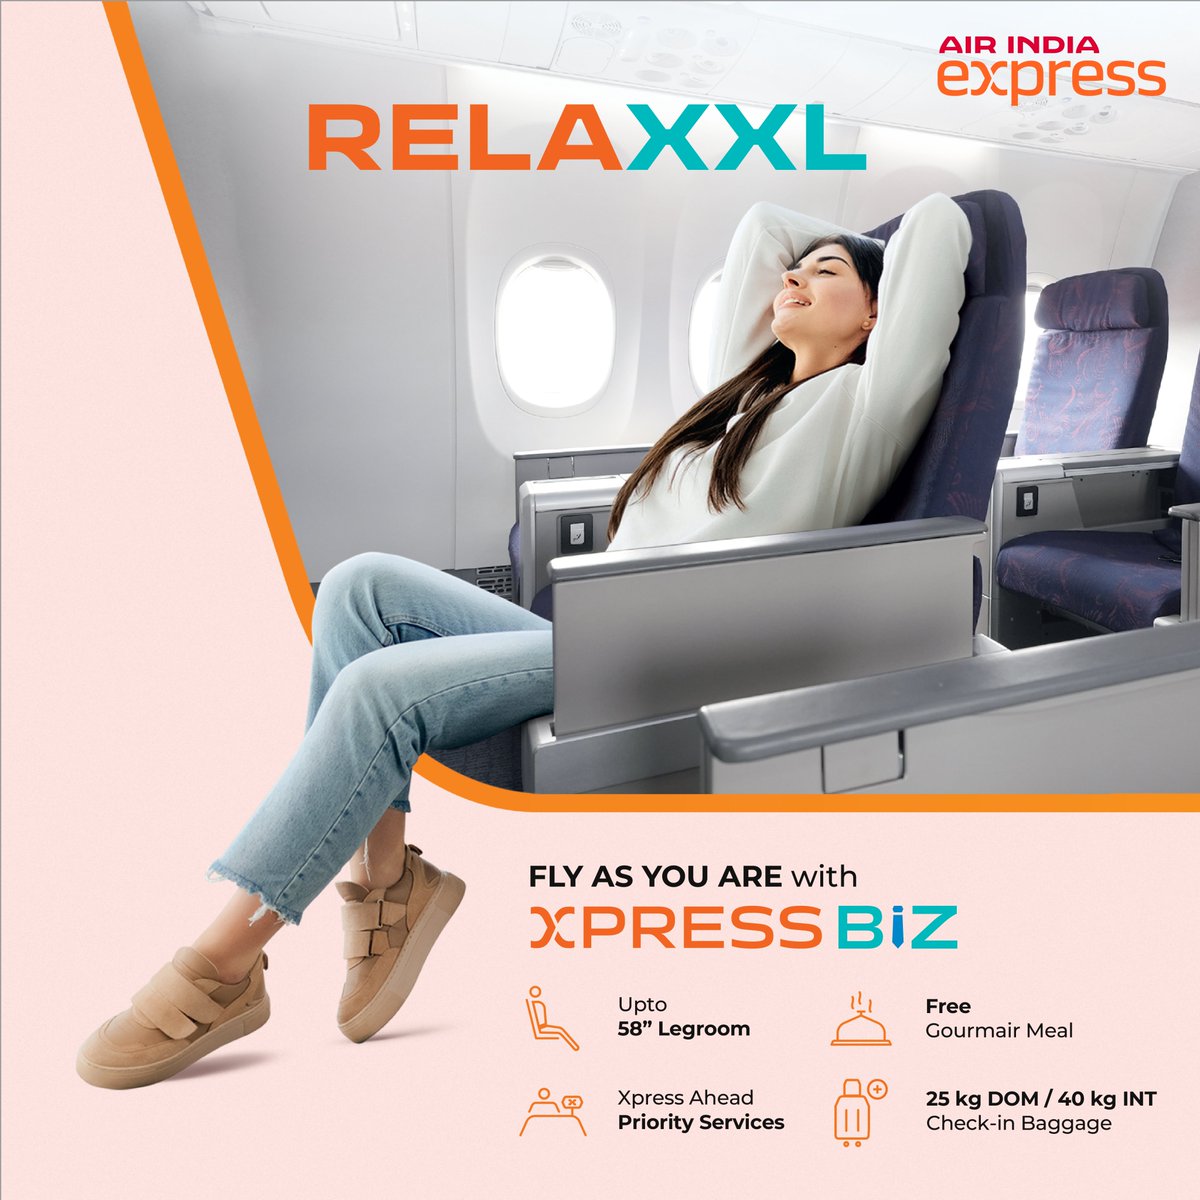 Stretch out and unwind with Xpress Biz, and enjoy exciting benefits: 💺Up to 58' of extra legroom, ⭐ Xpress Ahead priority services, 🍲 Free Gourmair Hot Meal 🧳25kg for domestic and 40kg for international for check-in baggage ✈️ #FlyAsYouAre and experience #FastBookings